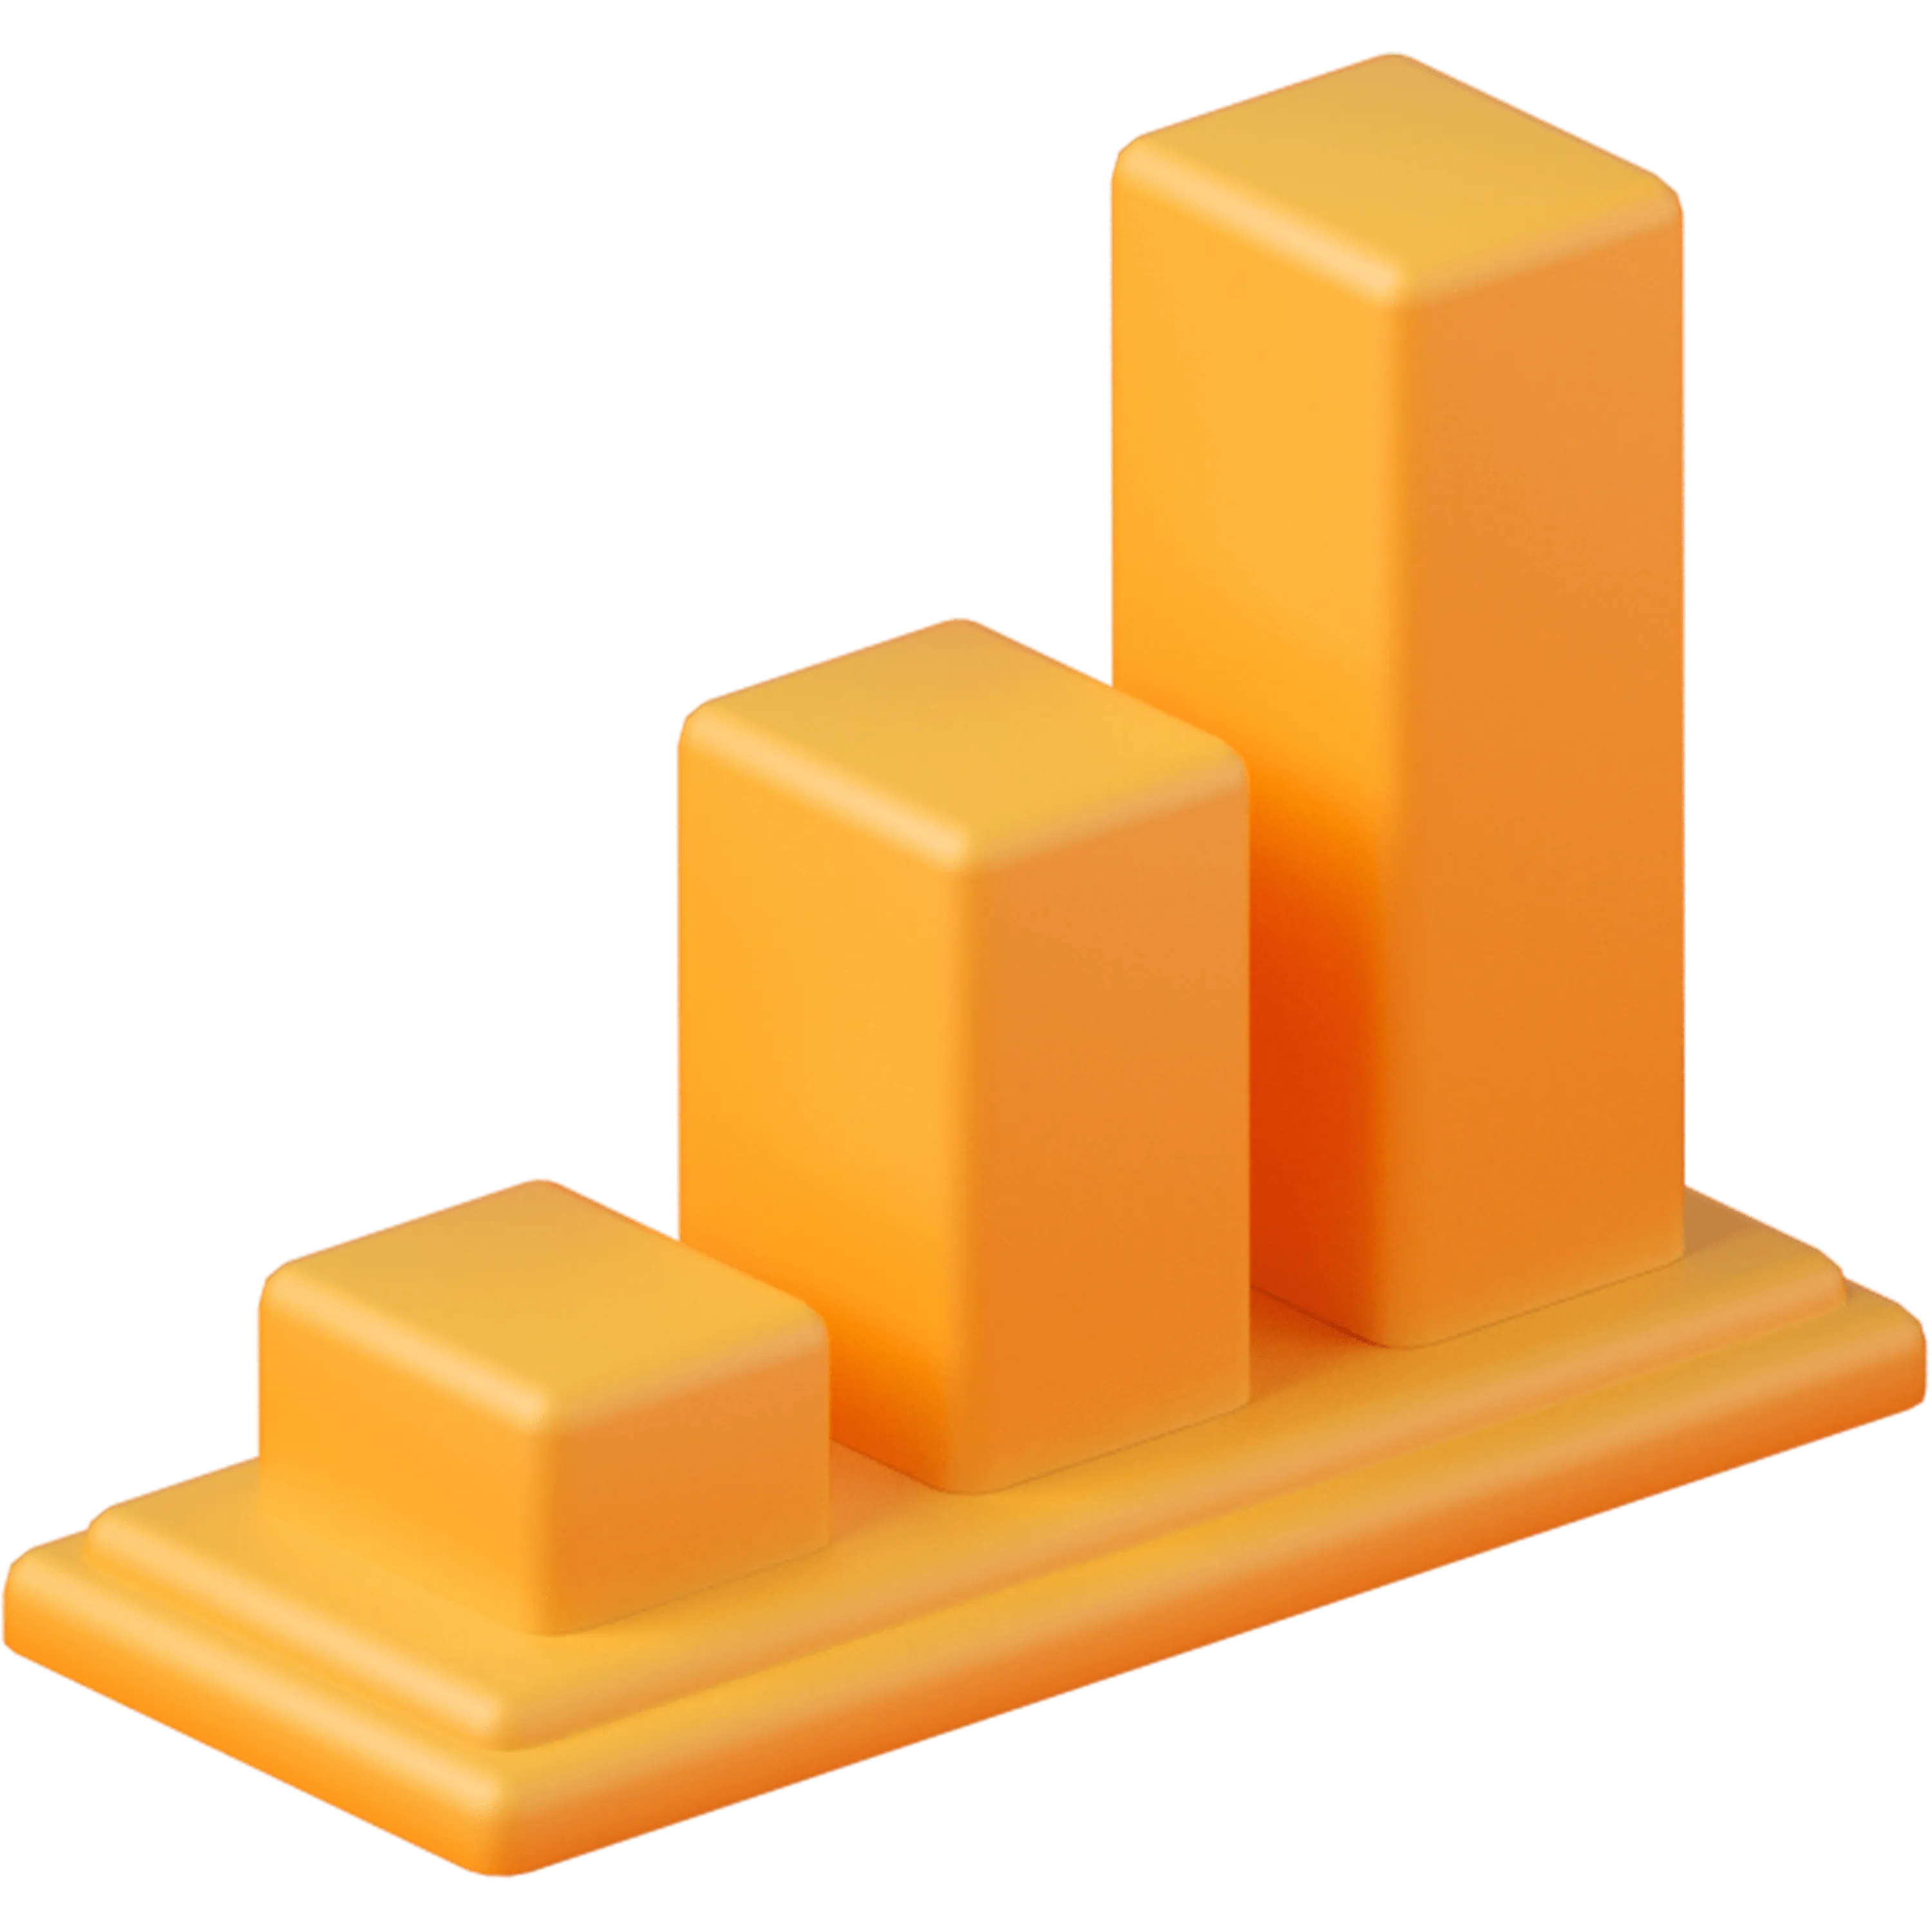 A 3d orange red bar chart icon.